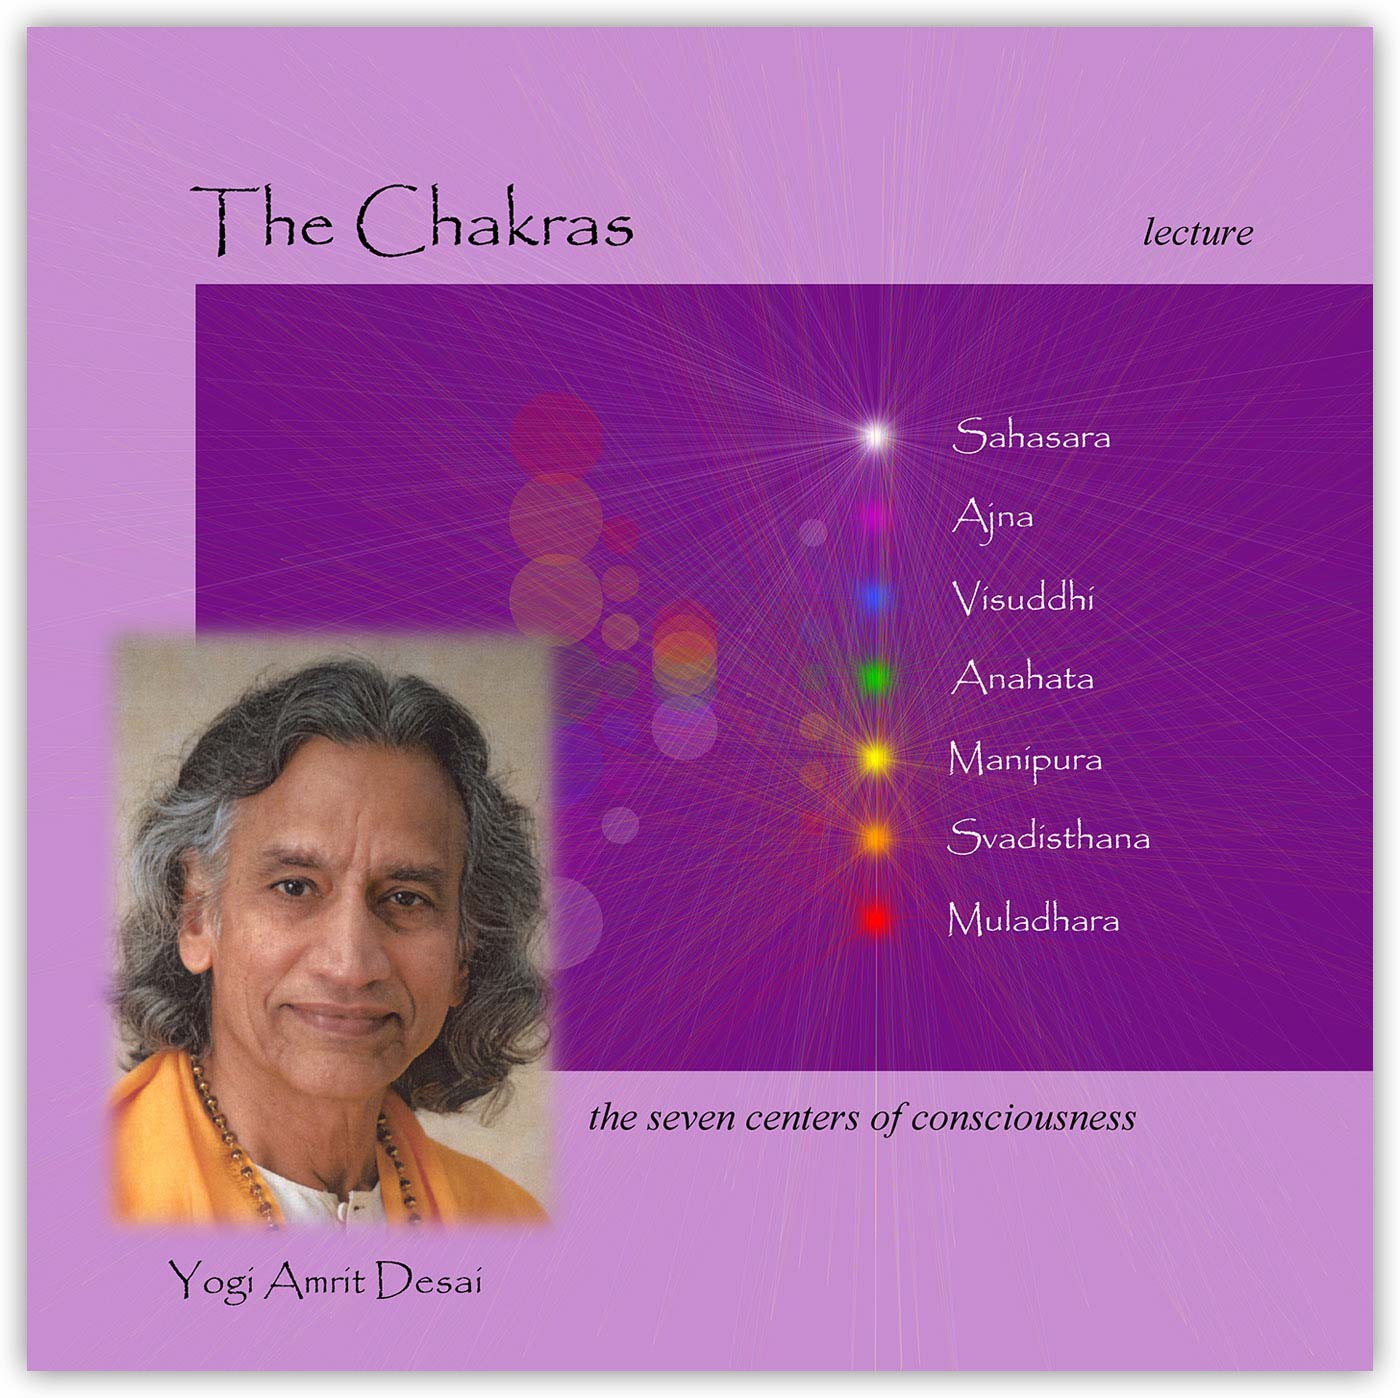 The Chakras: The Seven Centers of Consciousness with Yogi Amrit Desai